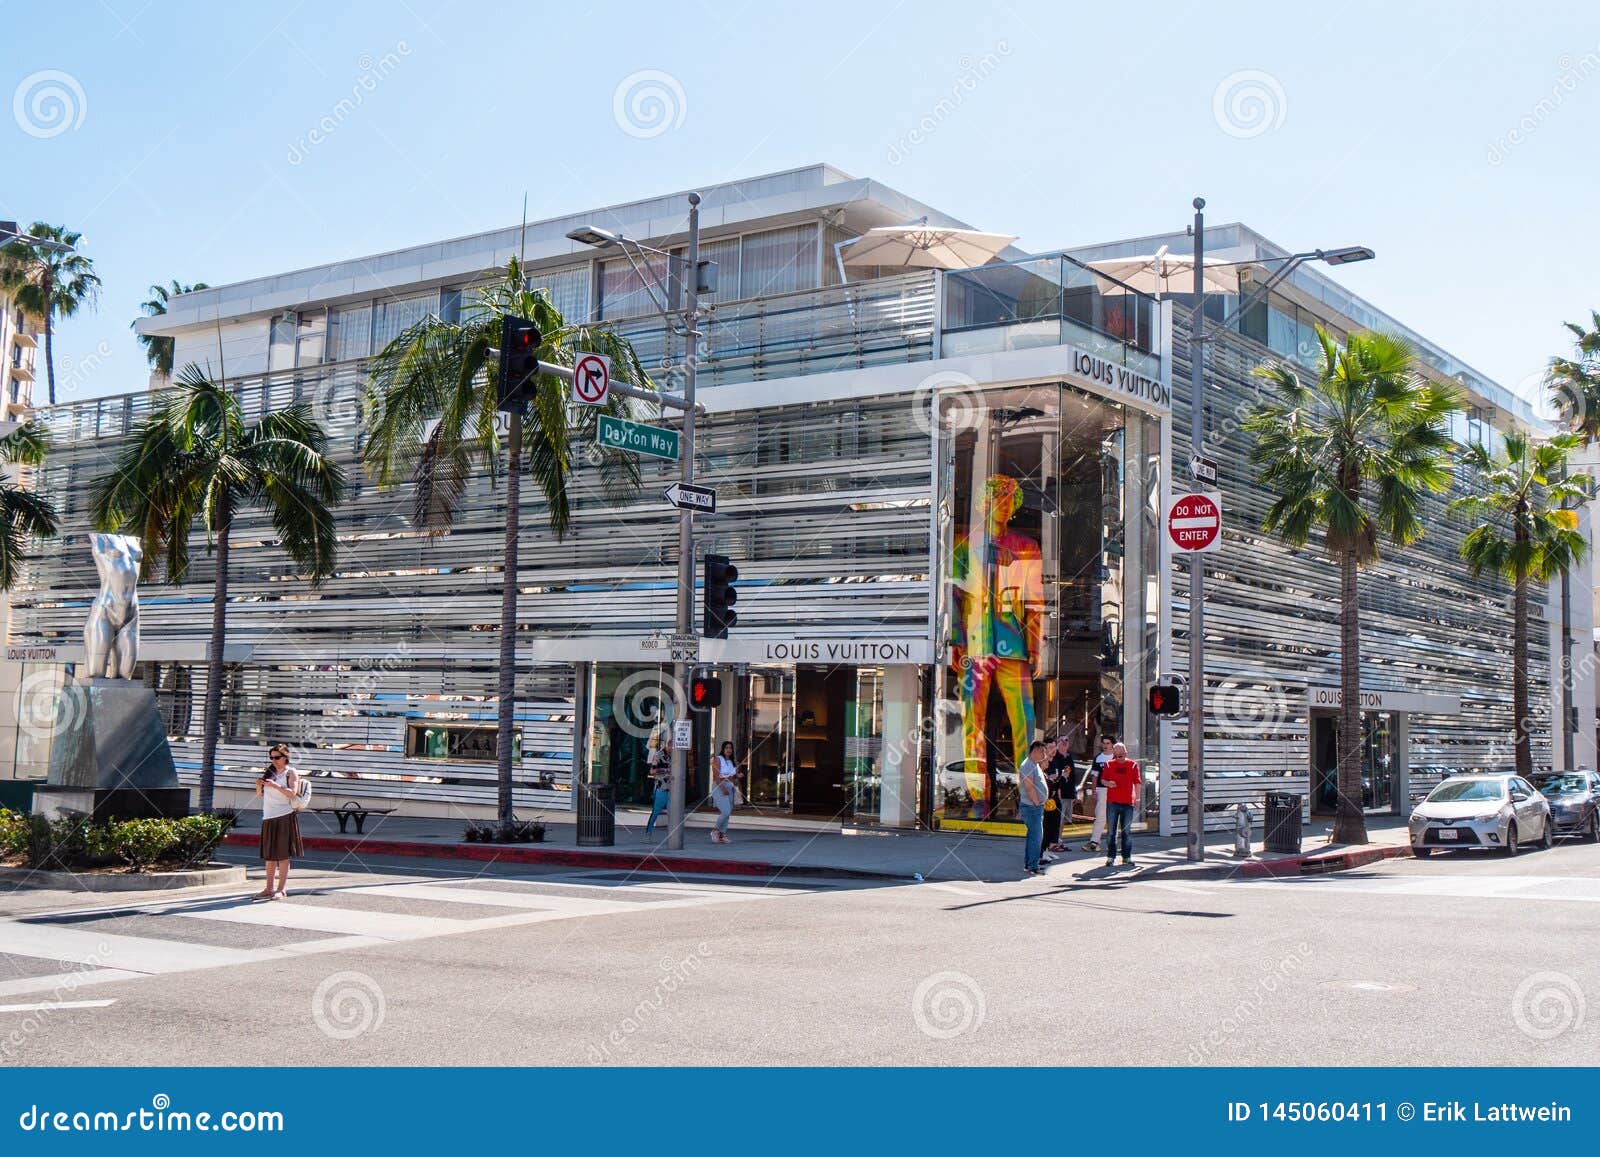 Louis Vuitton Store At Rodeo Drive In Beverly Hills - CALIFORNIA, USA - MARCH 18, 2019 Editorial ...